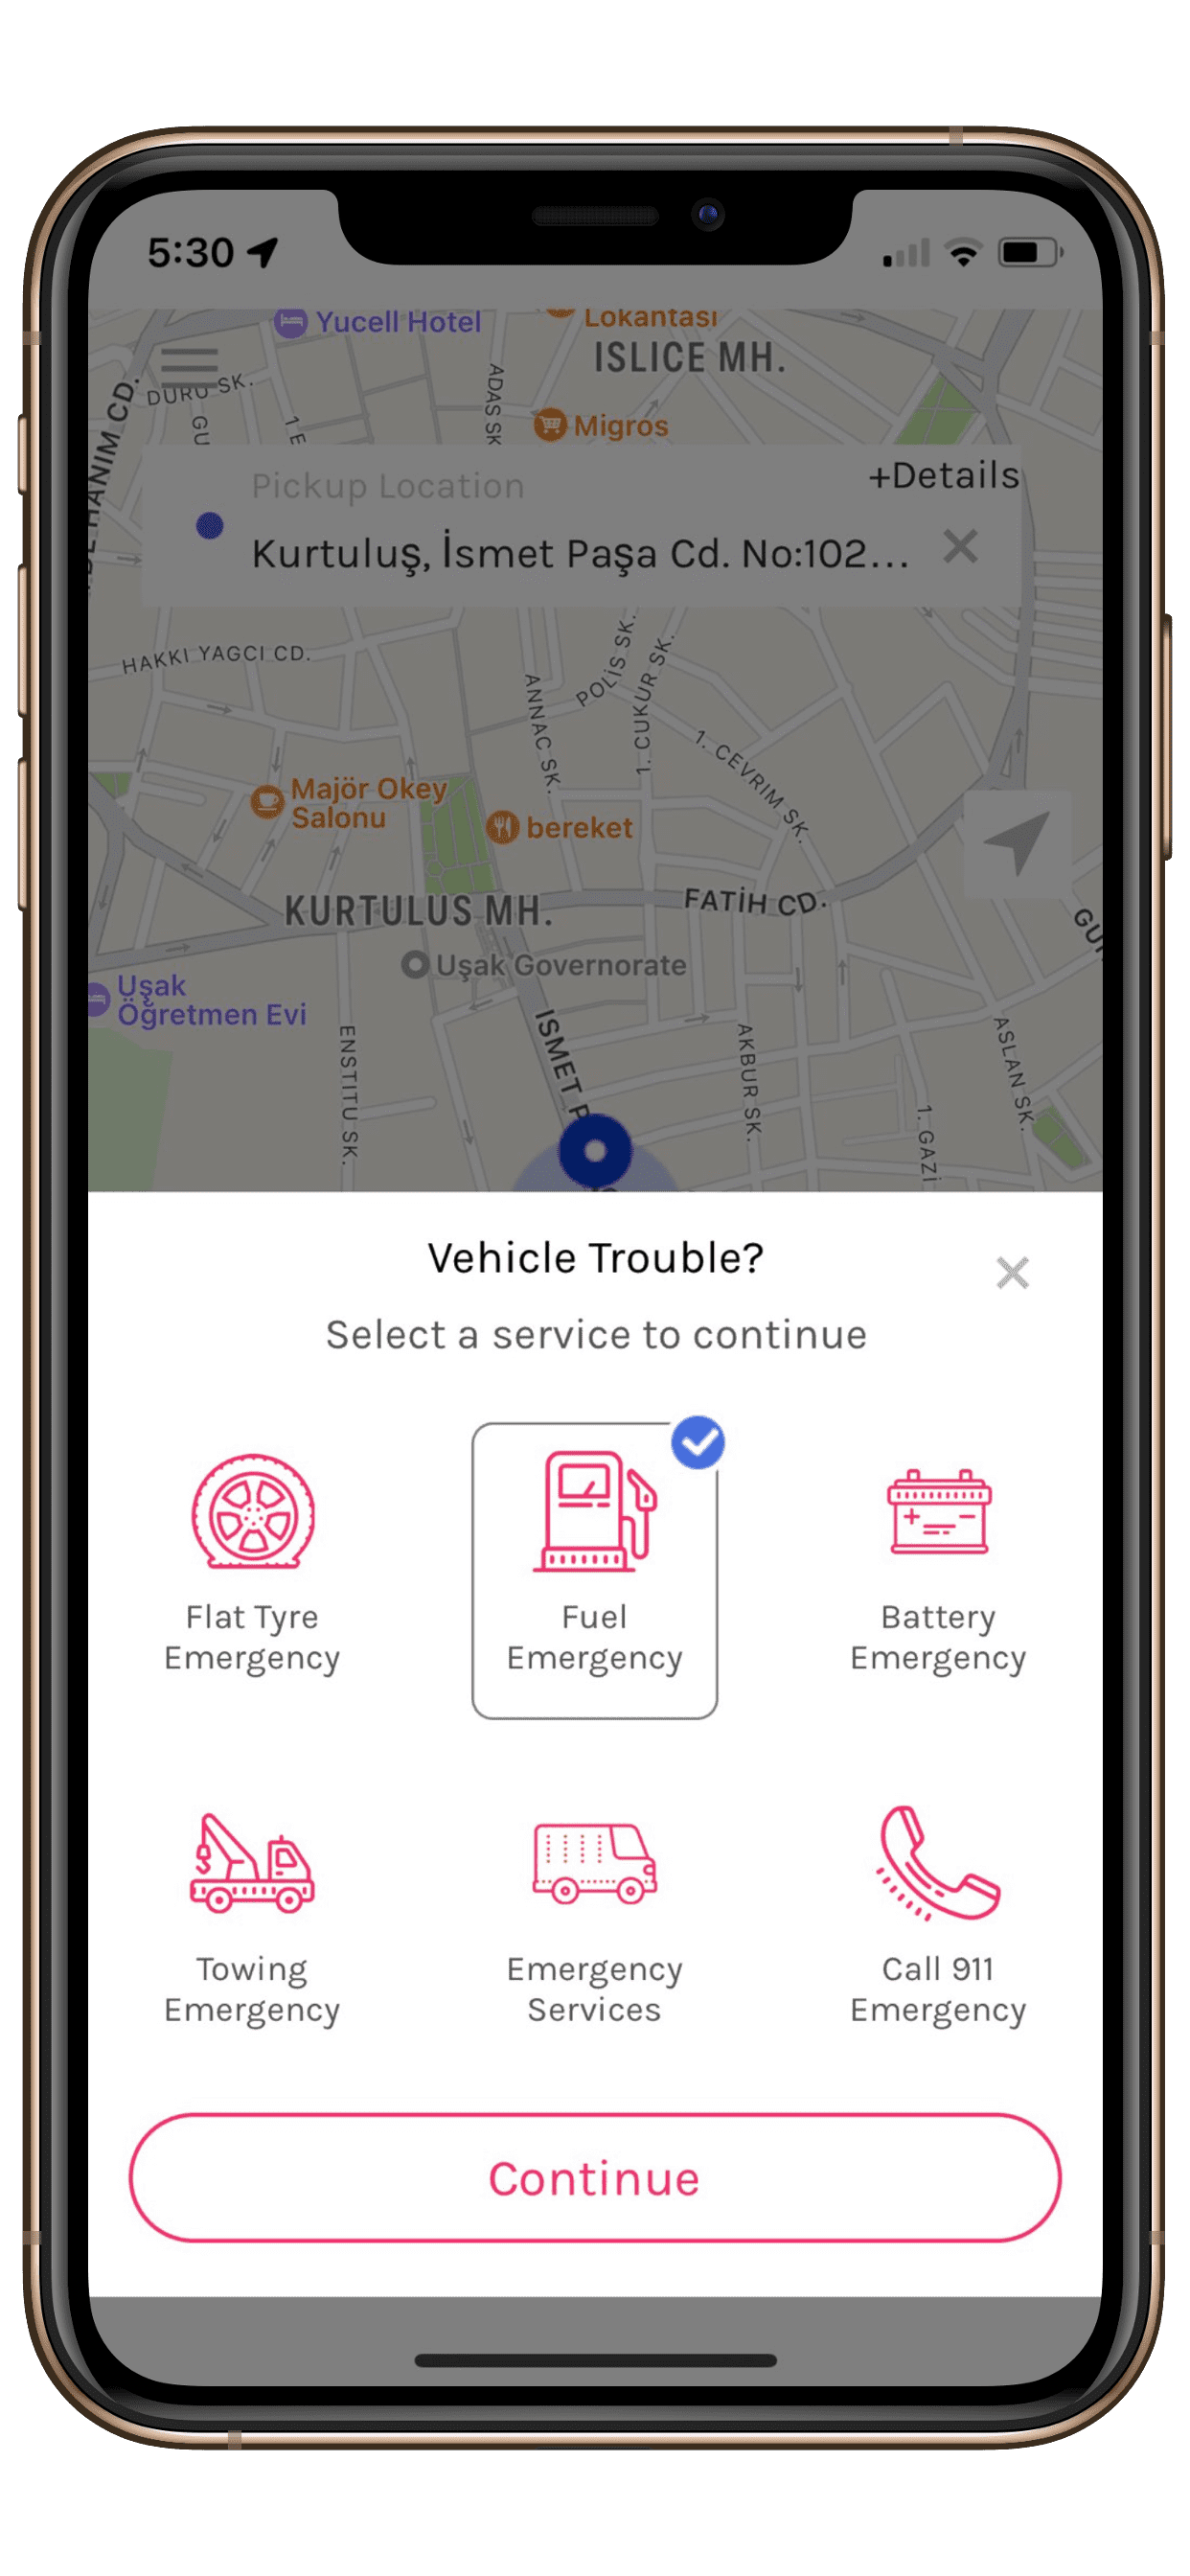 On Demand Towing App